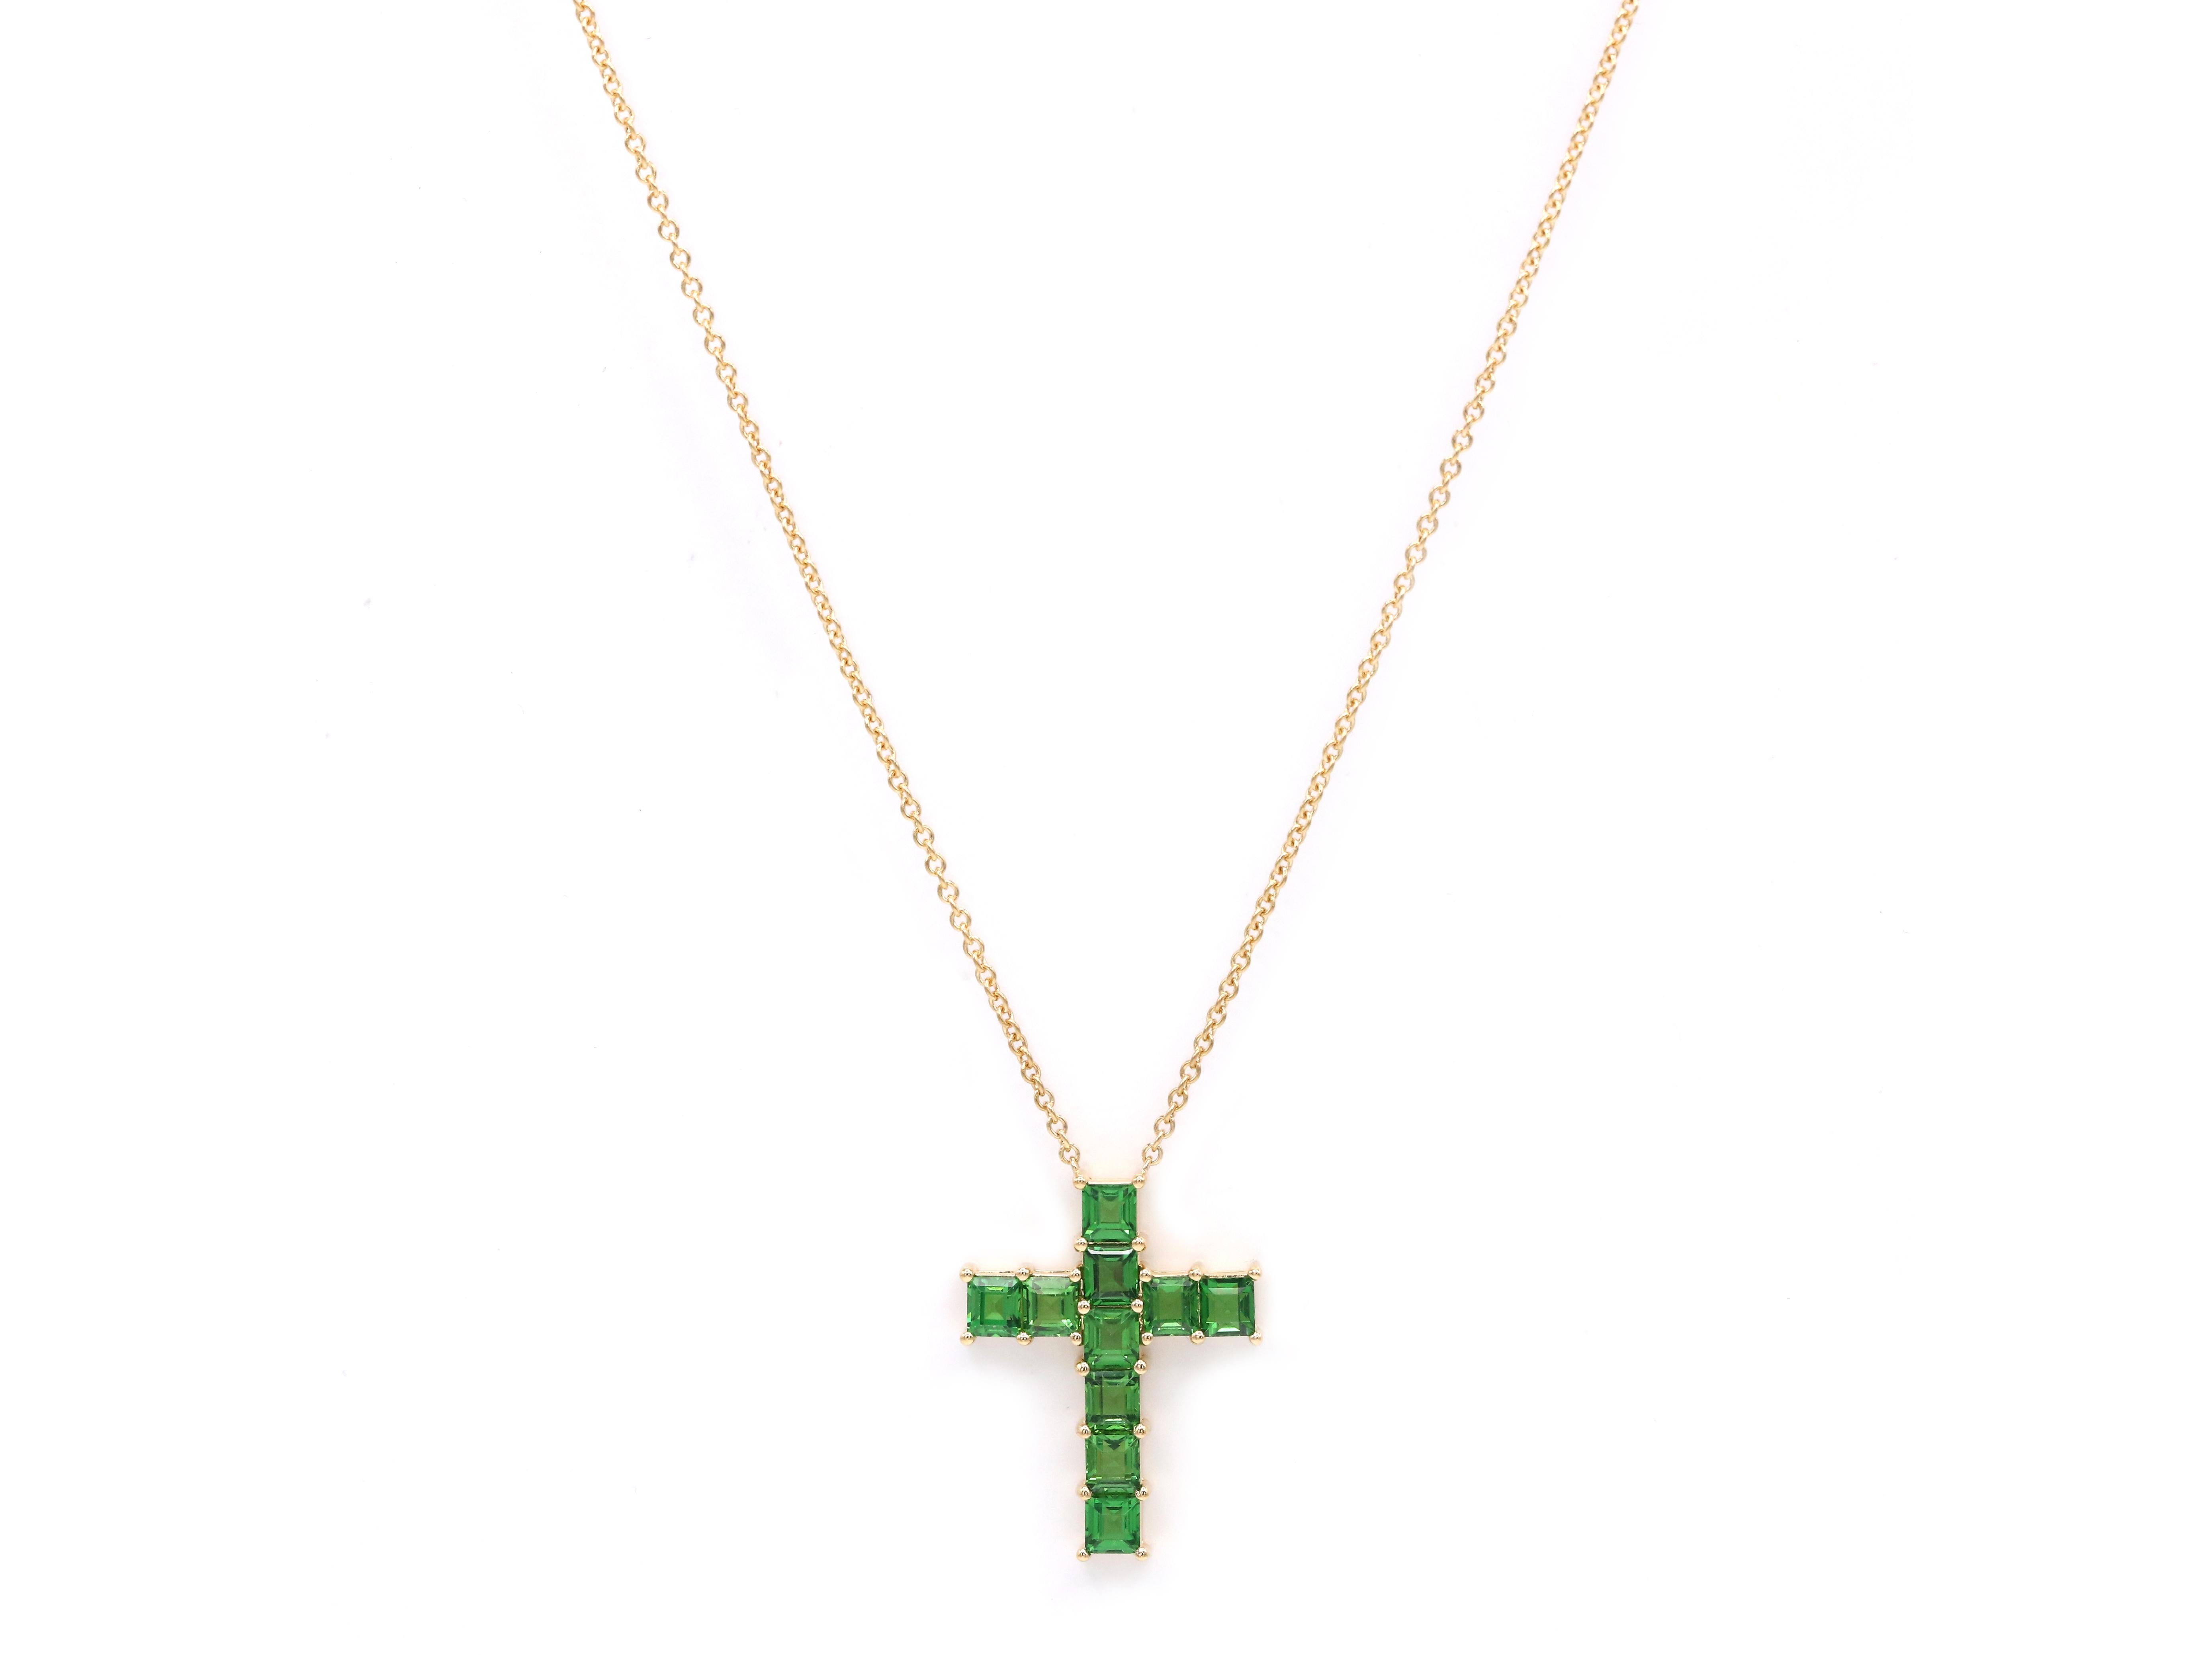 This stunning 2.95 Carat Tsavorite 18K Yellow Gold Cross features a modern design that brings a fresh take on classics, at the same time it is made according to the tradition of the Christian church.
Deep green tsavorite color will emphasize your